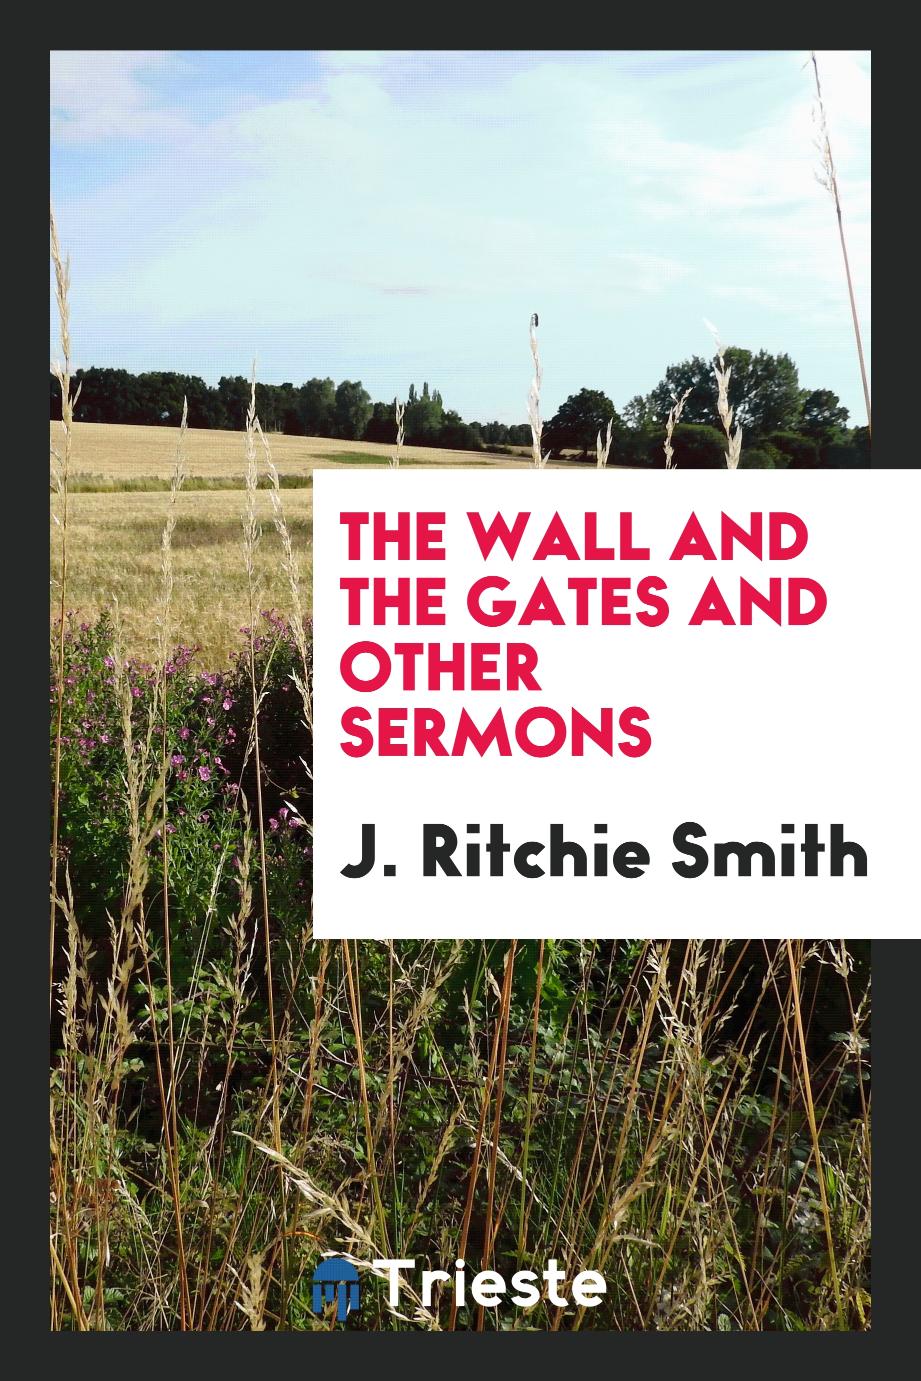 The wall and The gates and other sermons